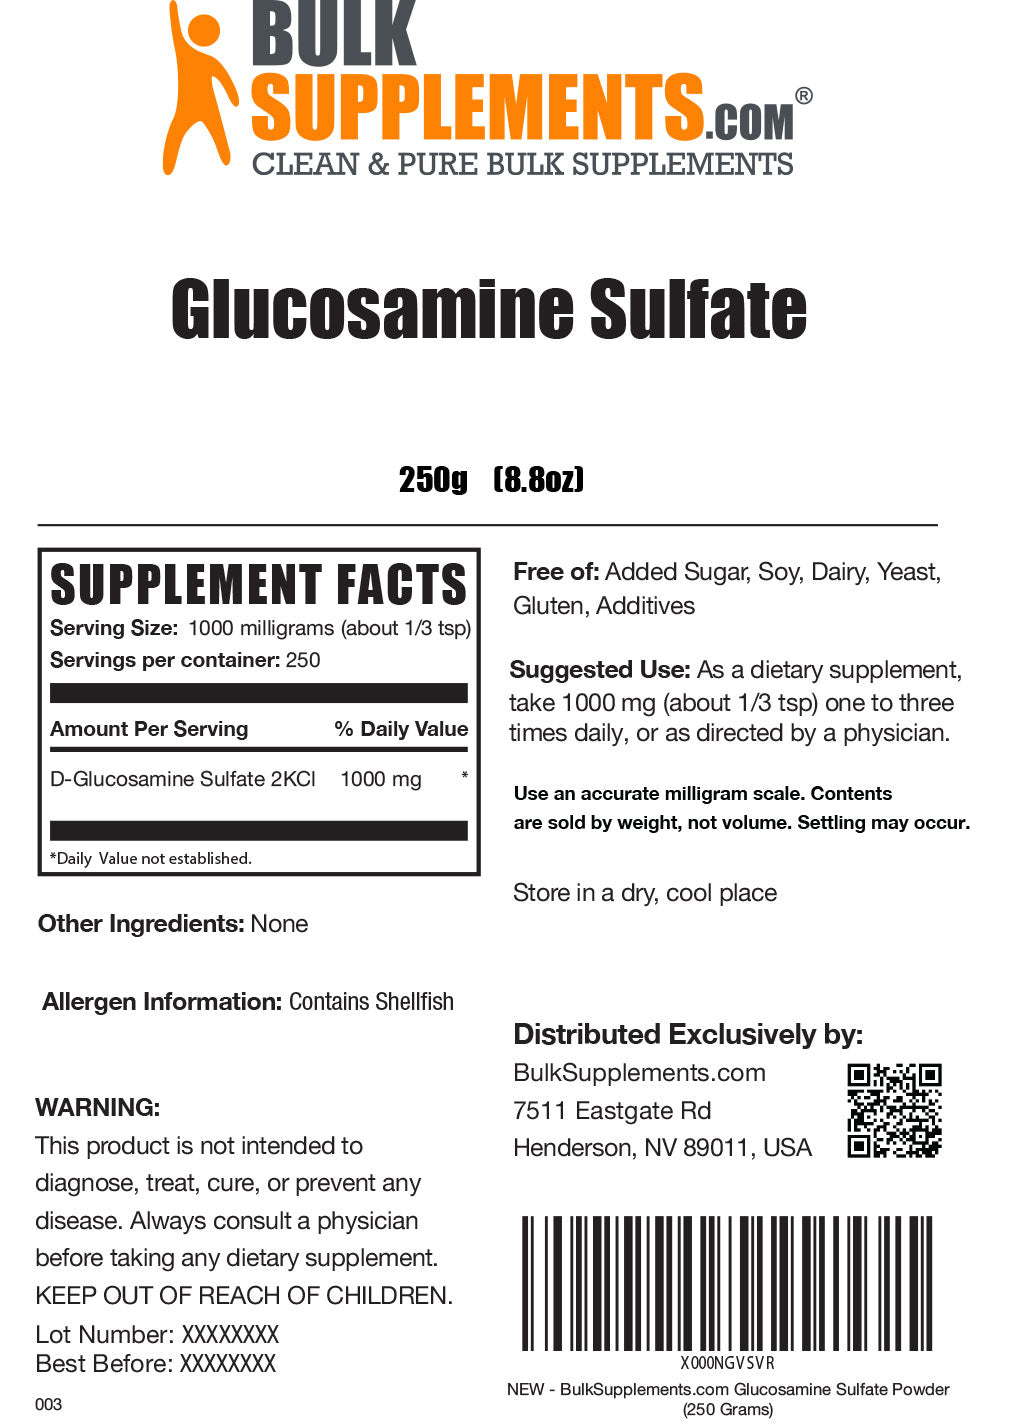 Glucosamine Sulfate supplement facts 250g